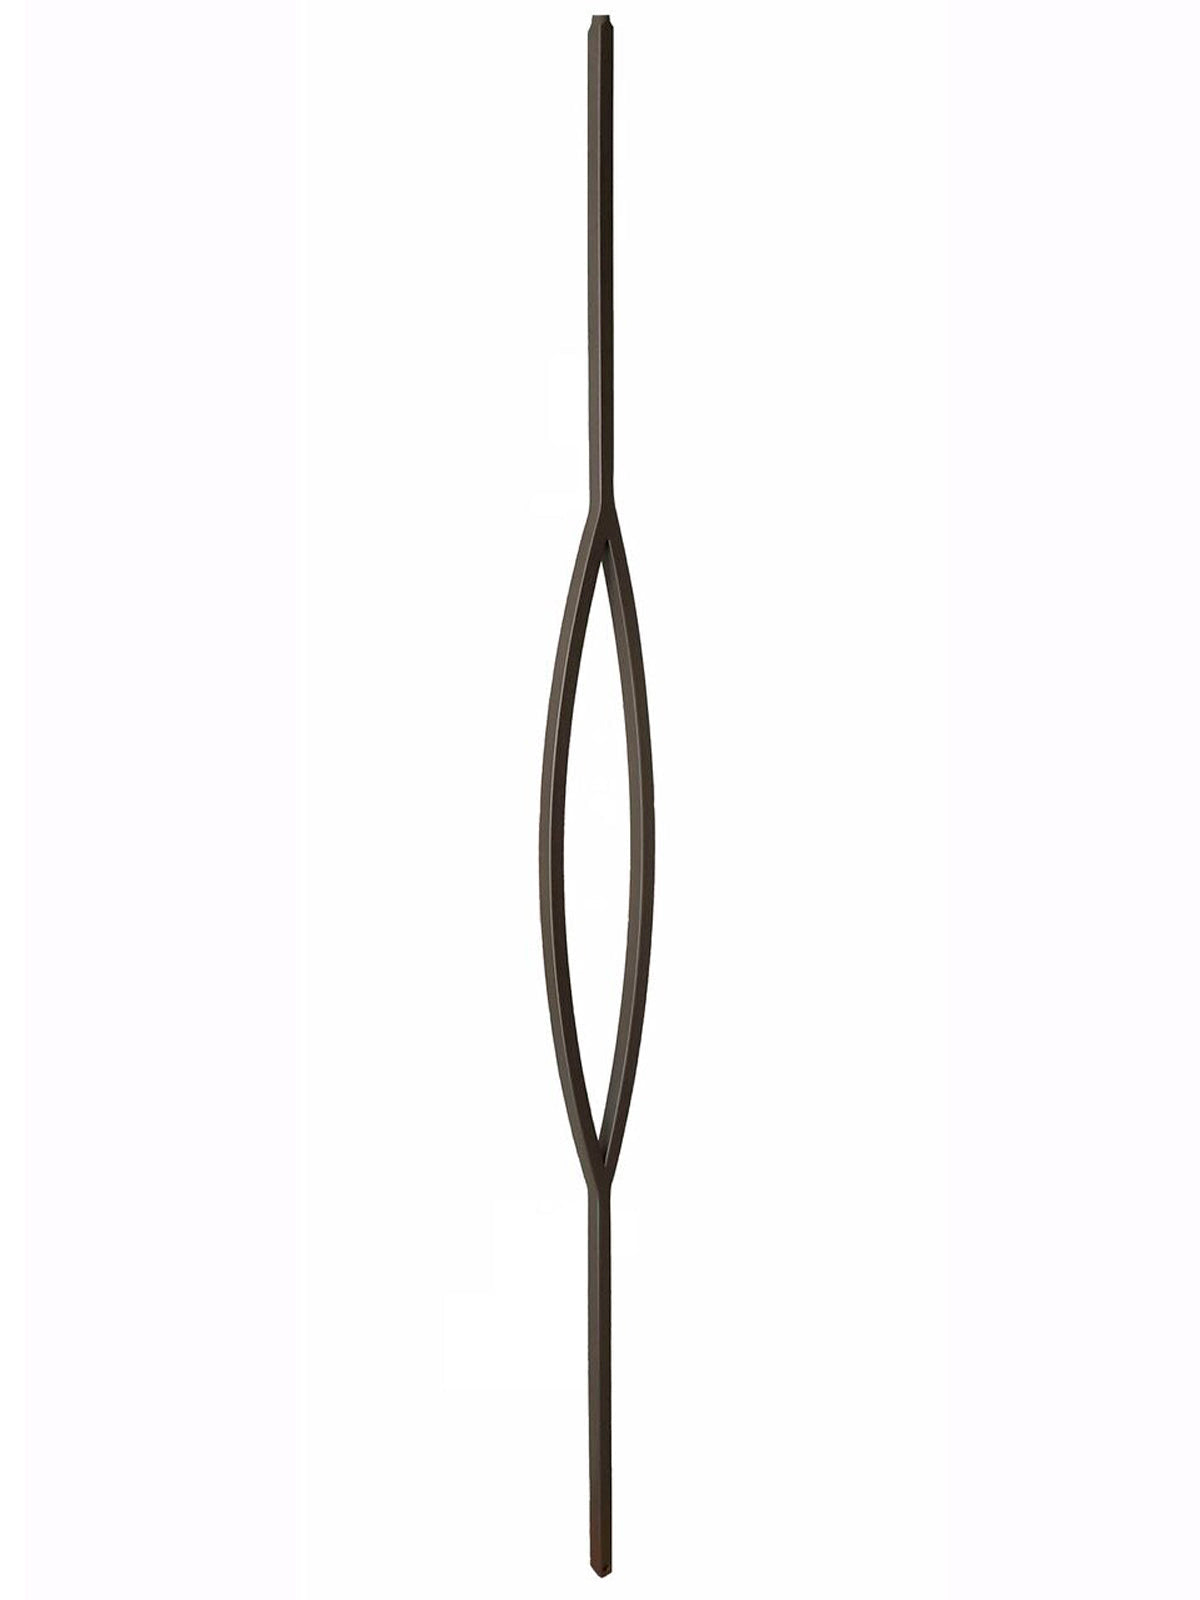 Mega Iron Baluster 9993 - 3/4" Square - Pointed Oval